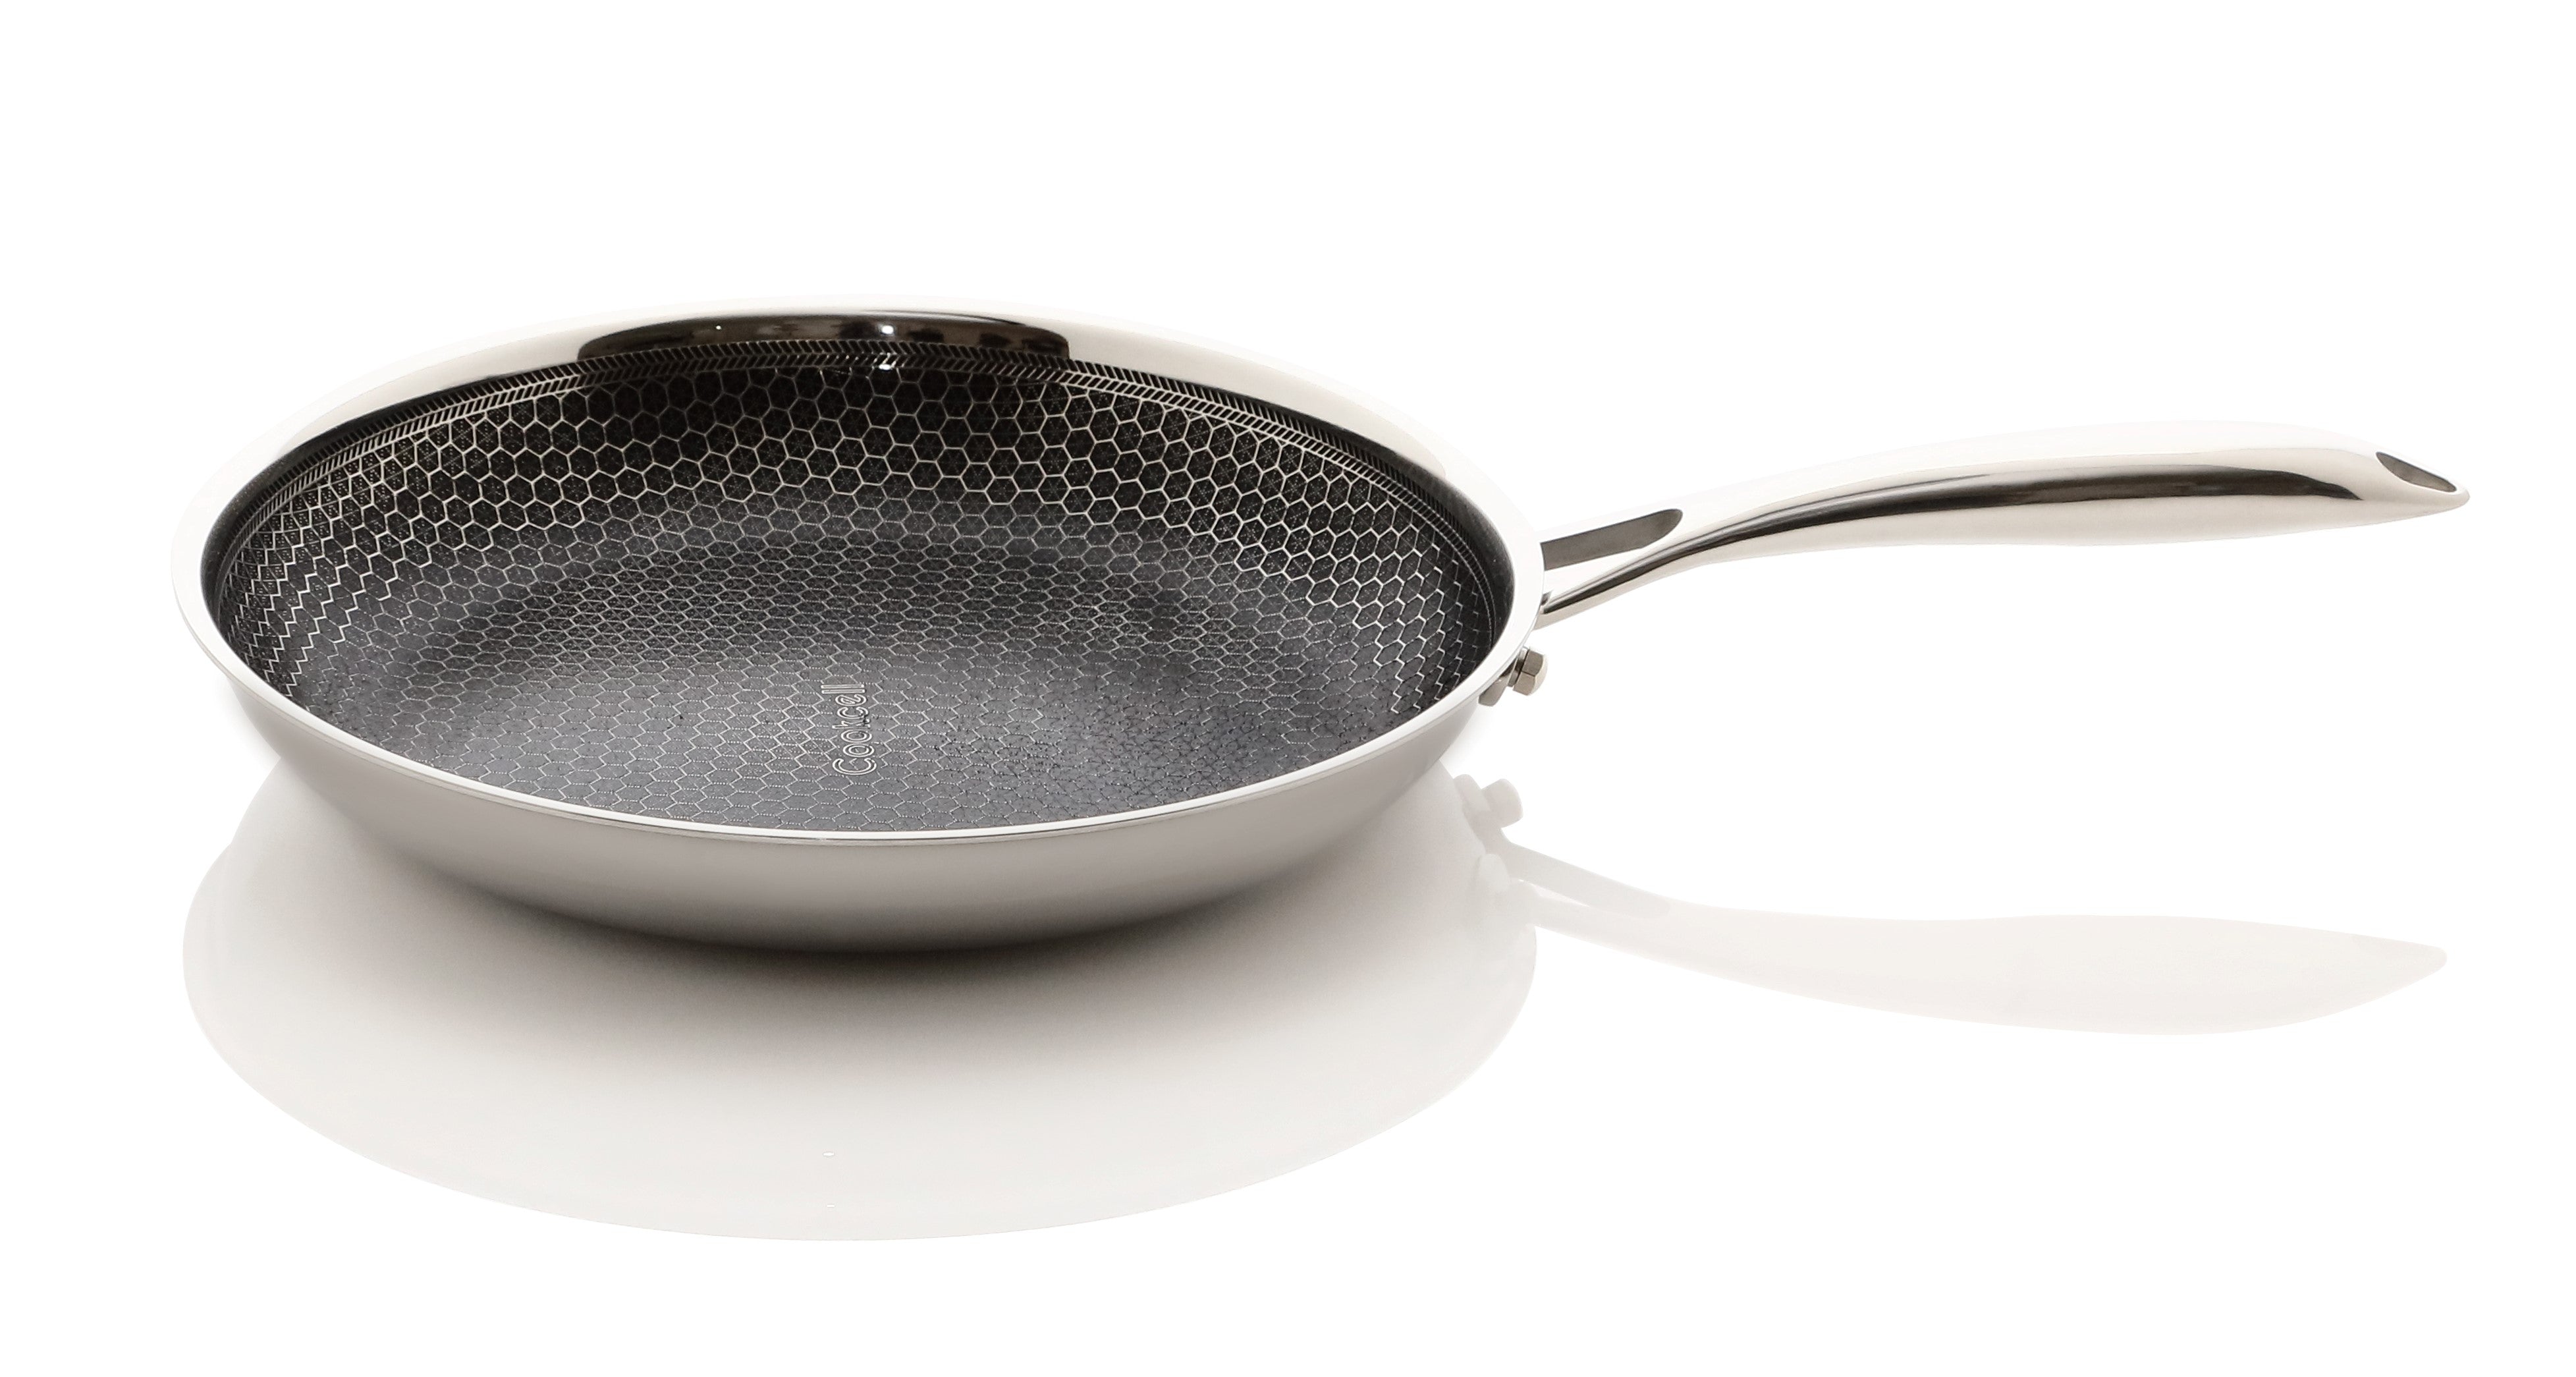 COOKCELL Stainless Steel Non-stick Hybrid Frypan 28cm